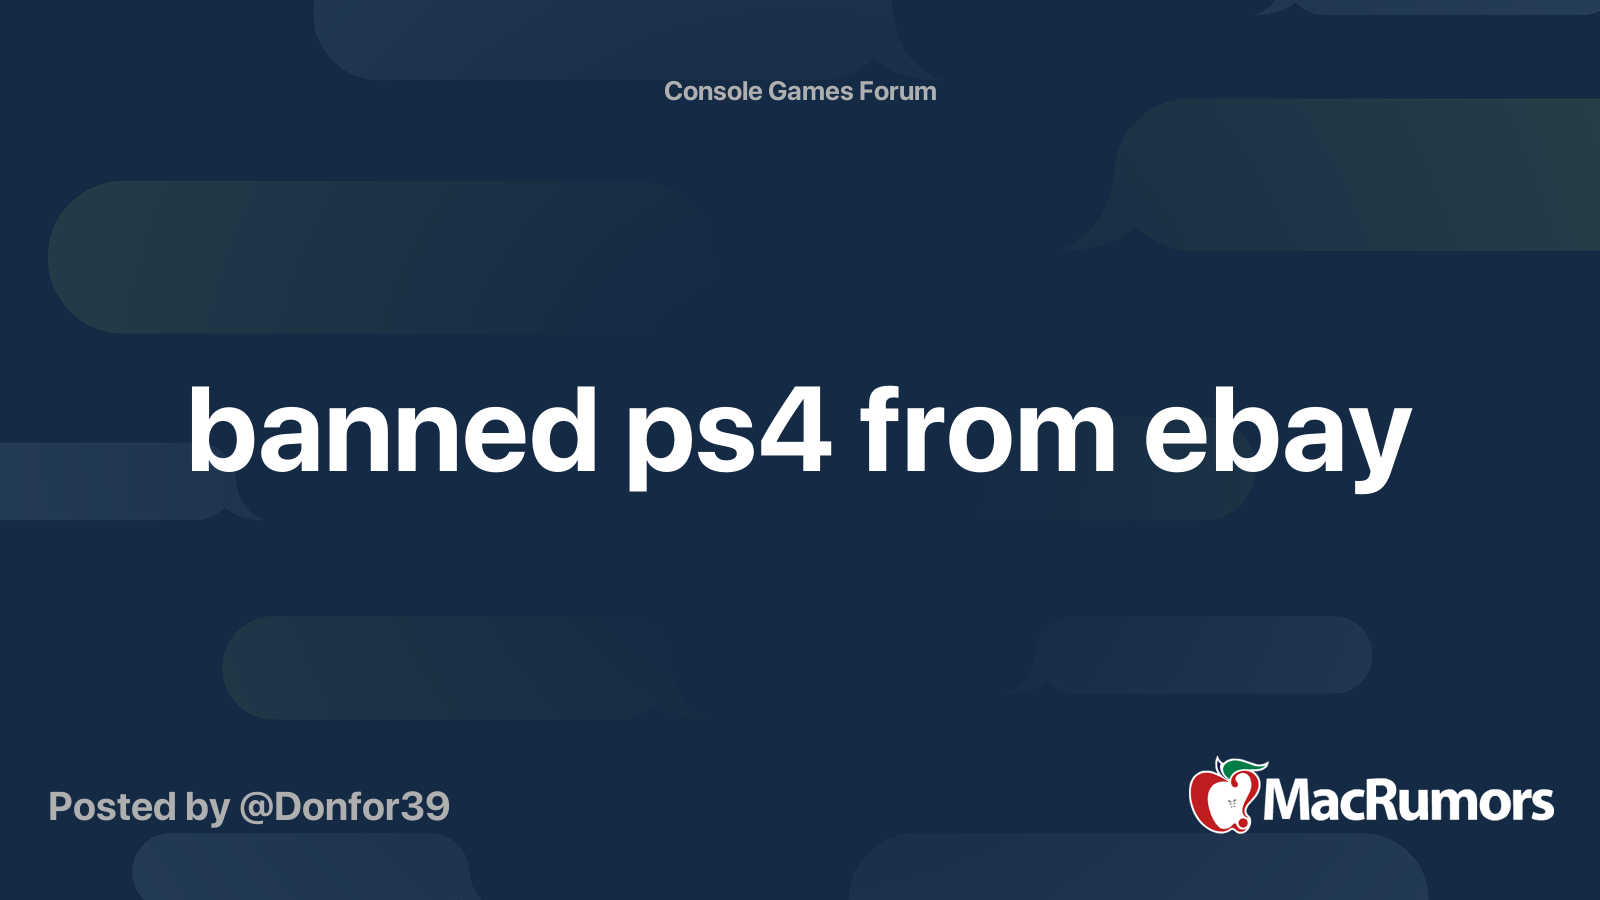 influenza åbenbaring tackle banned ps4 from ebay | MacRumors Forums